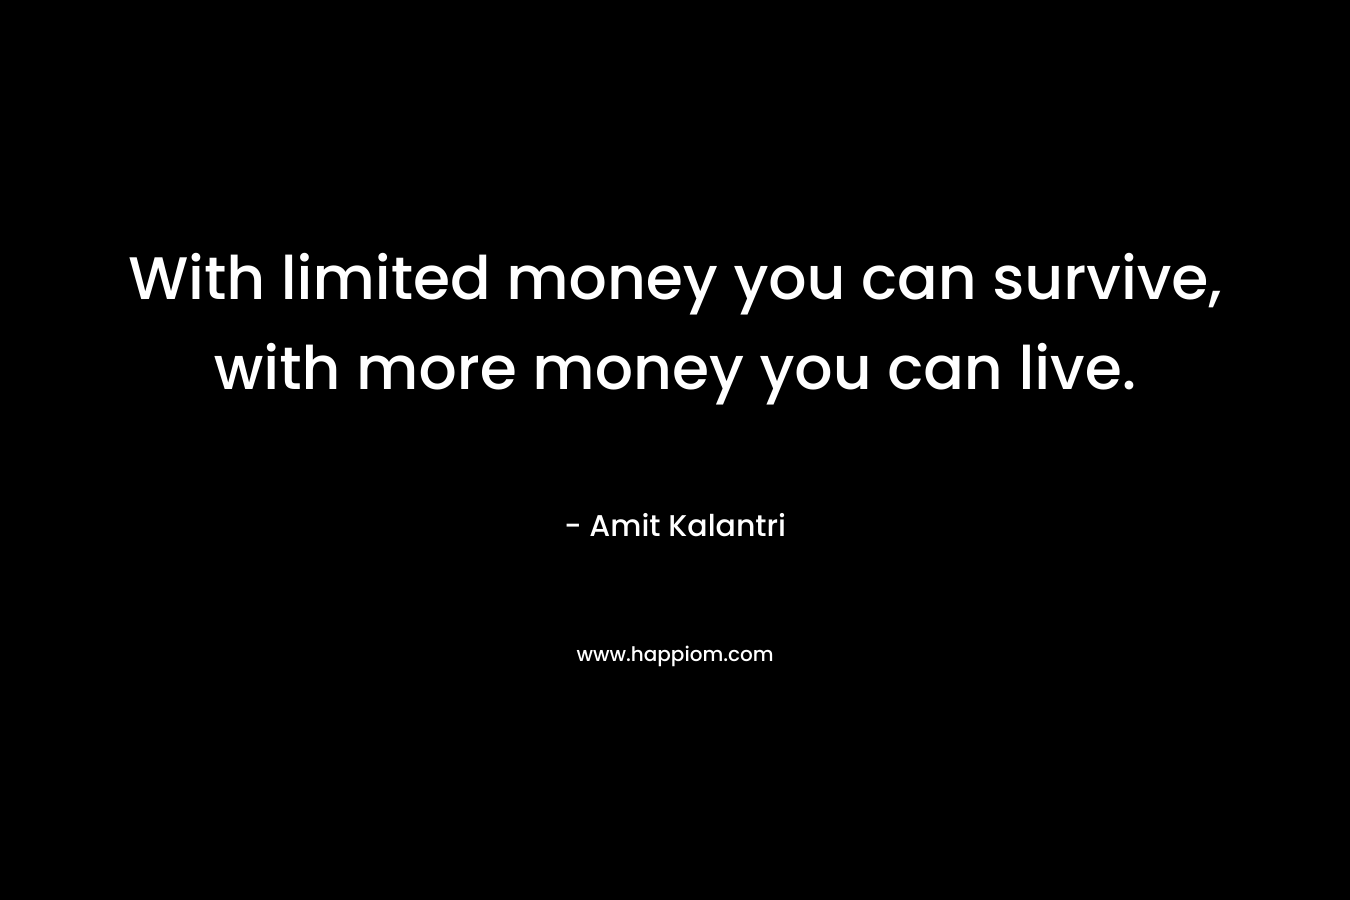 With limited money you can survive, with more money you can live.